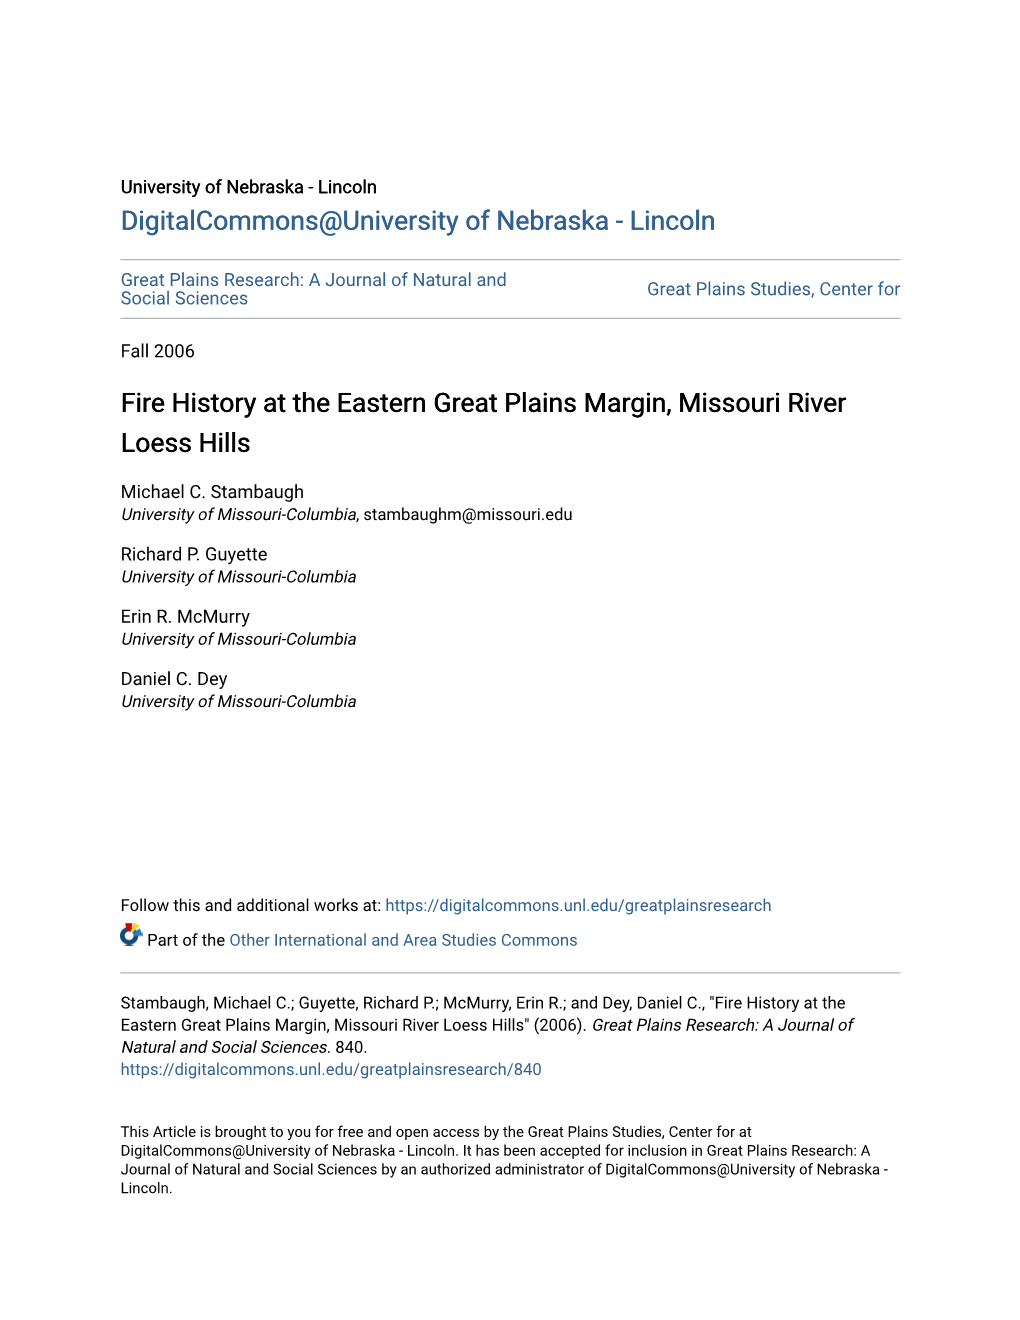 Fire History at the Eastern Great Plains Margin, Missouri River Loess Hills